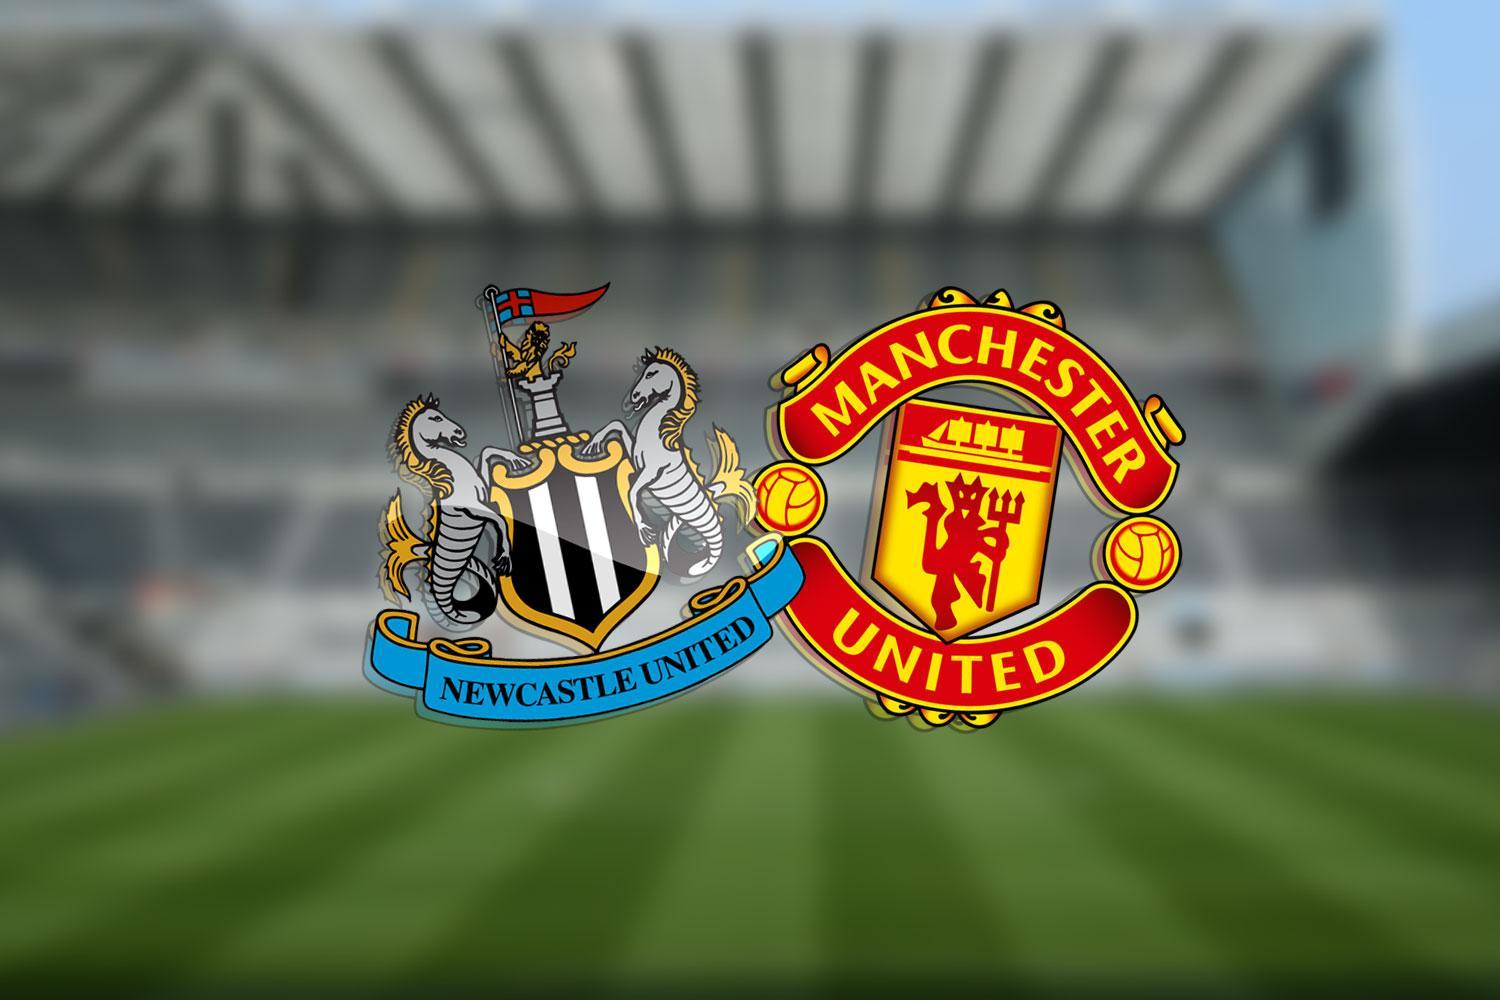 Newcastle vs Manchester United: Team news, match facts and prediction